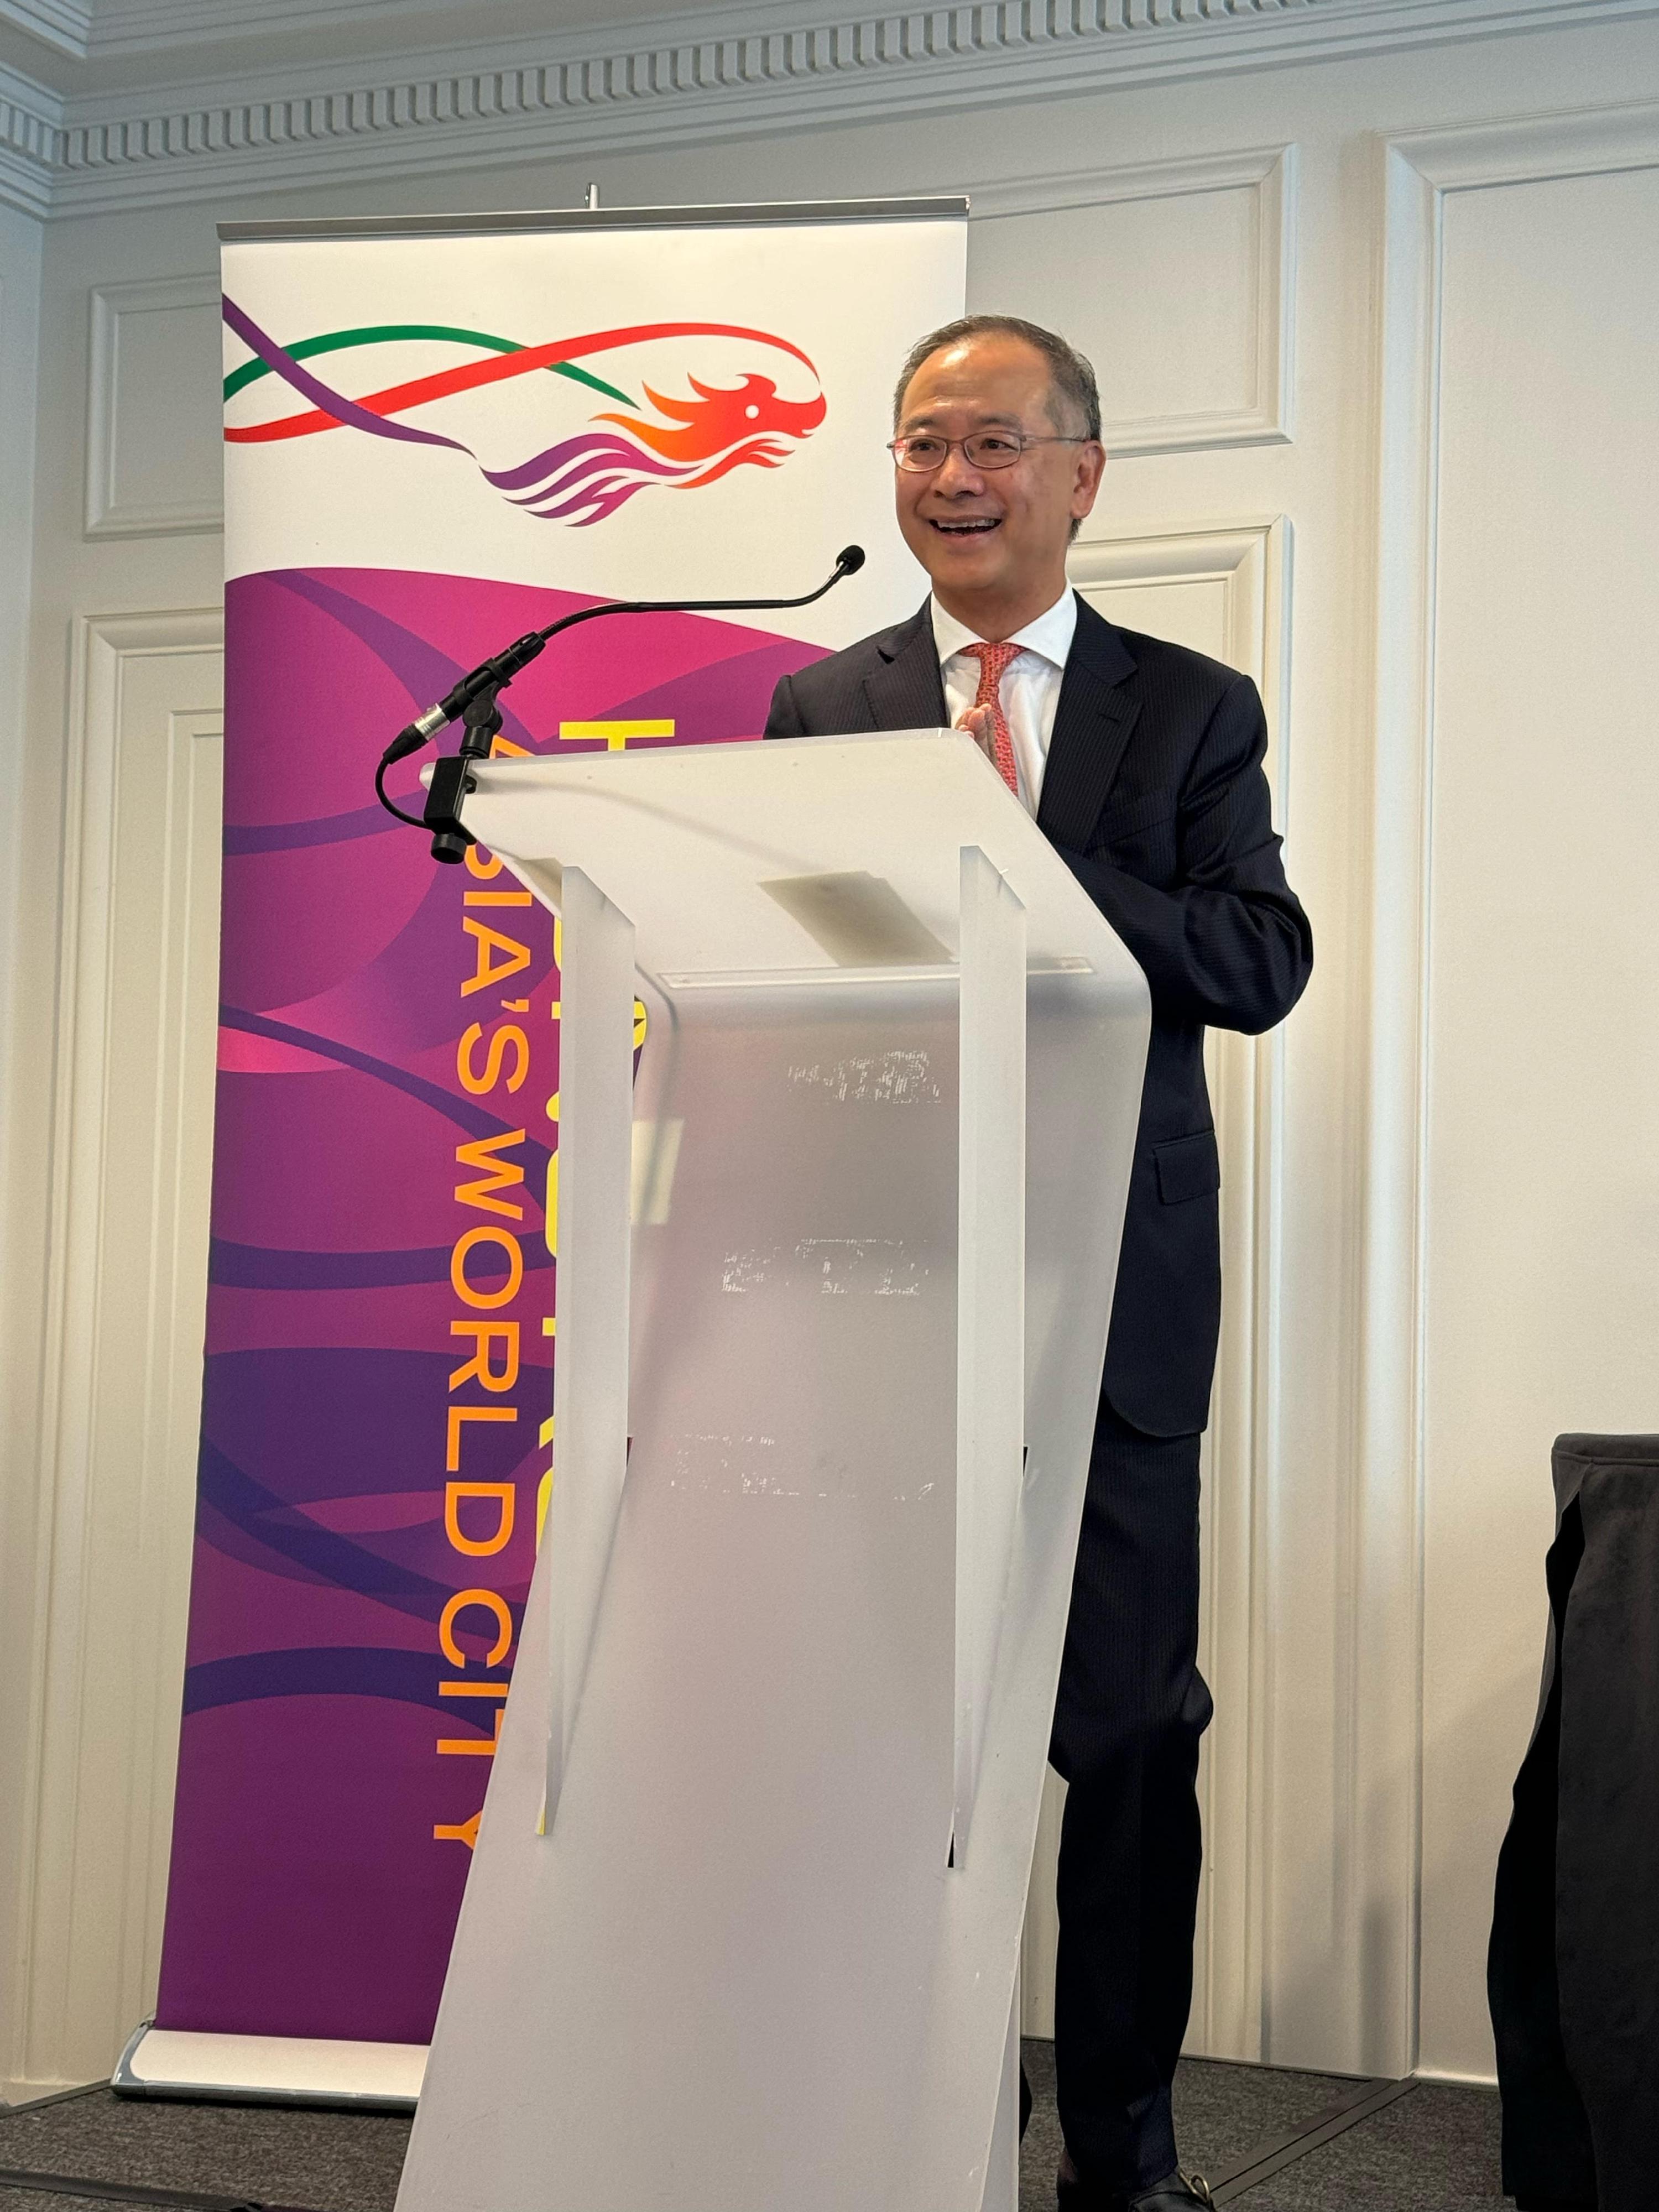 Chief Executive of the Hong Kong Monetary Authority, Mr Eddie Yue, spoke at a seminar on the role of Hong Kong as an international financial centre organised by the Hong Kong Economic and Trade office in Brussels, and Asia Centre on March 15 in Paris.